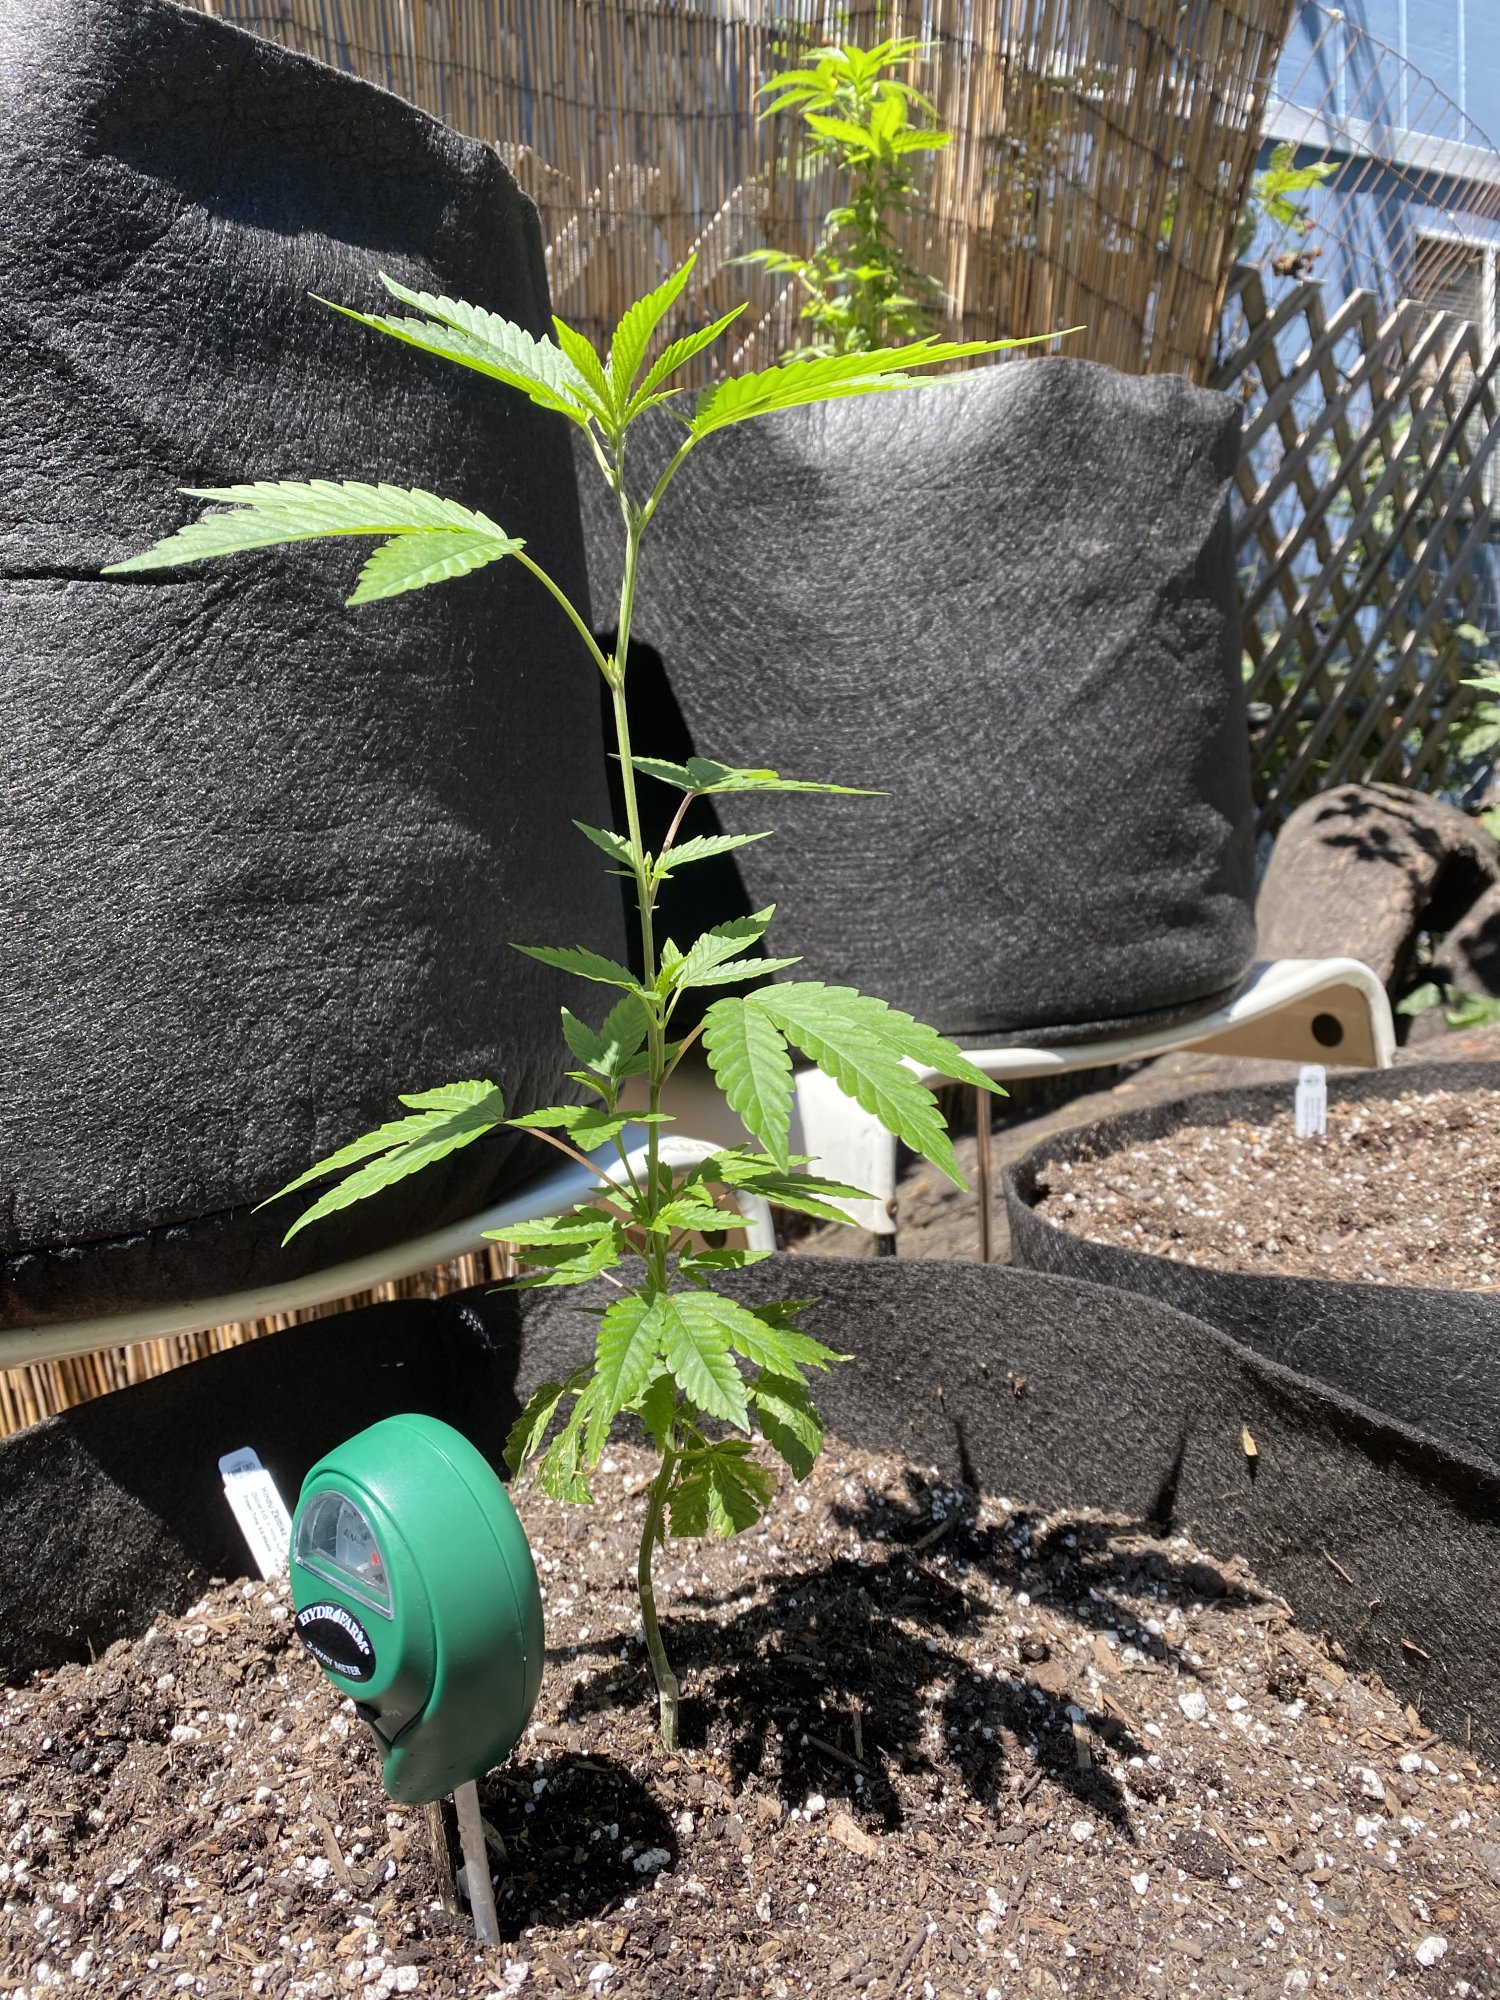 New outdoor grower looking for advice